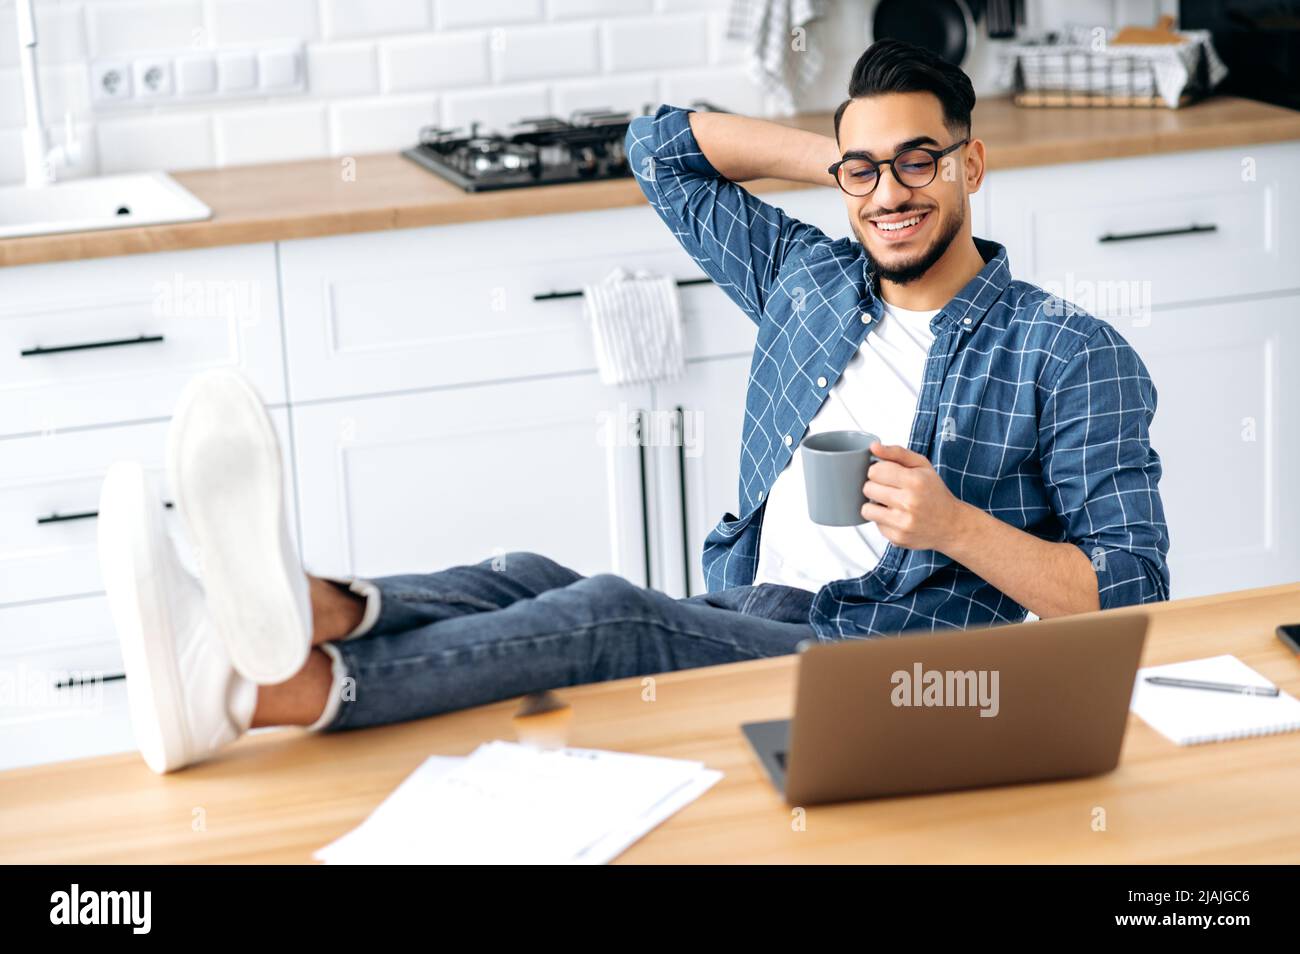 Chilling during work. Positive indian or arabian guy in stylish clothes, sit at home in the kitchen with his legs on the table, holding a cup of coffee in hand, working remotely from home using laptop Stock Photo